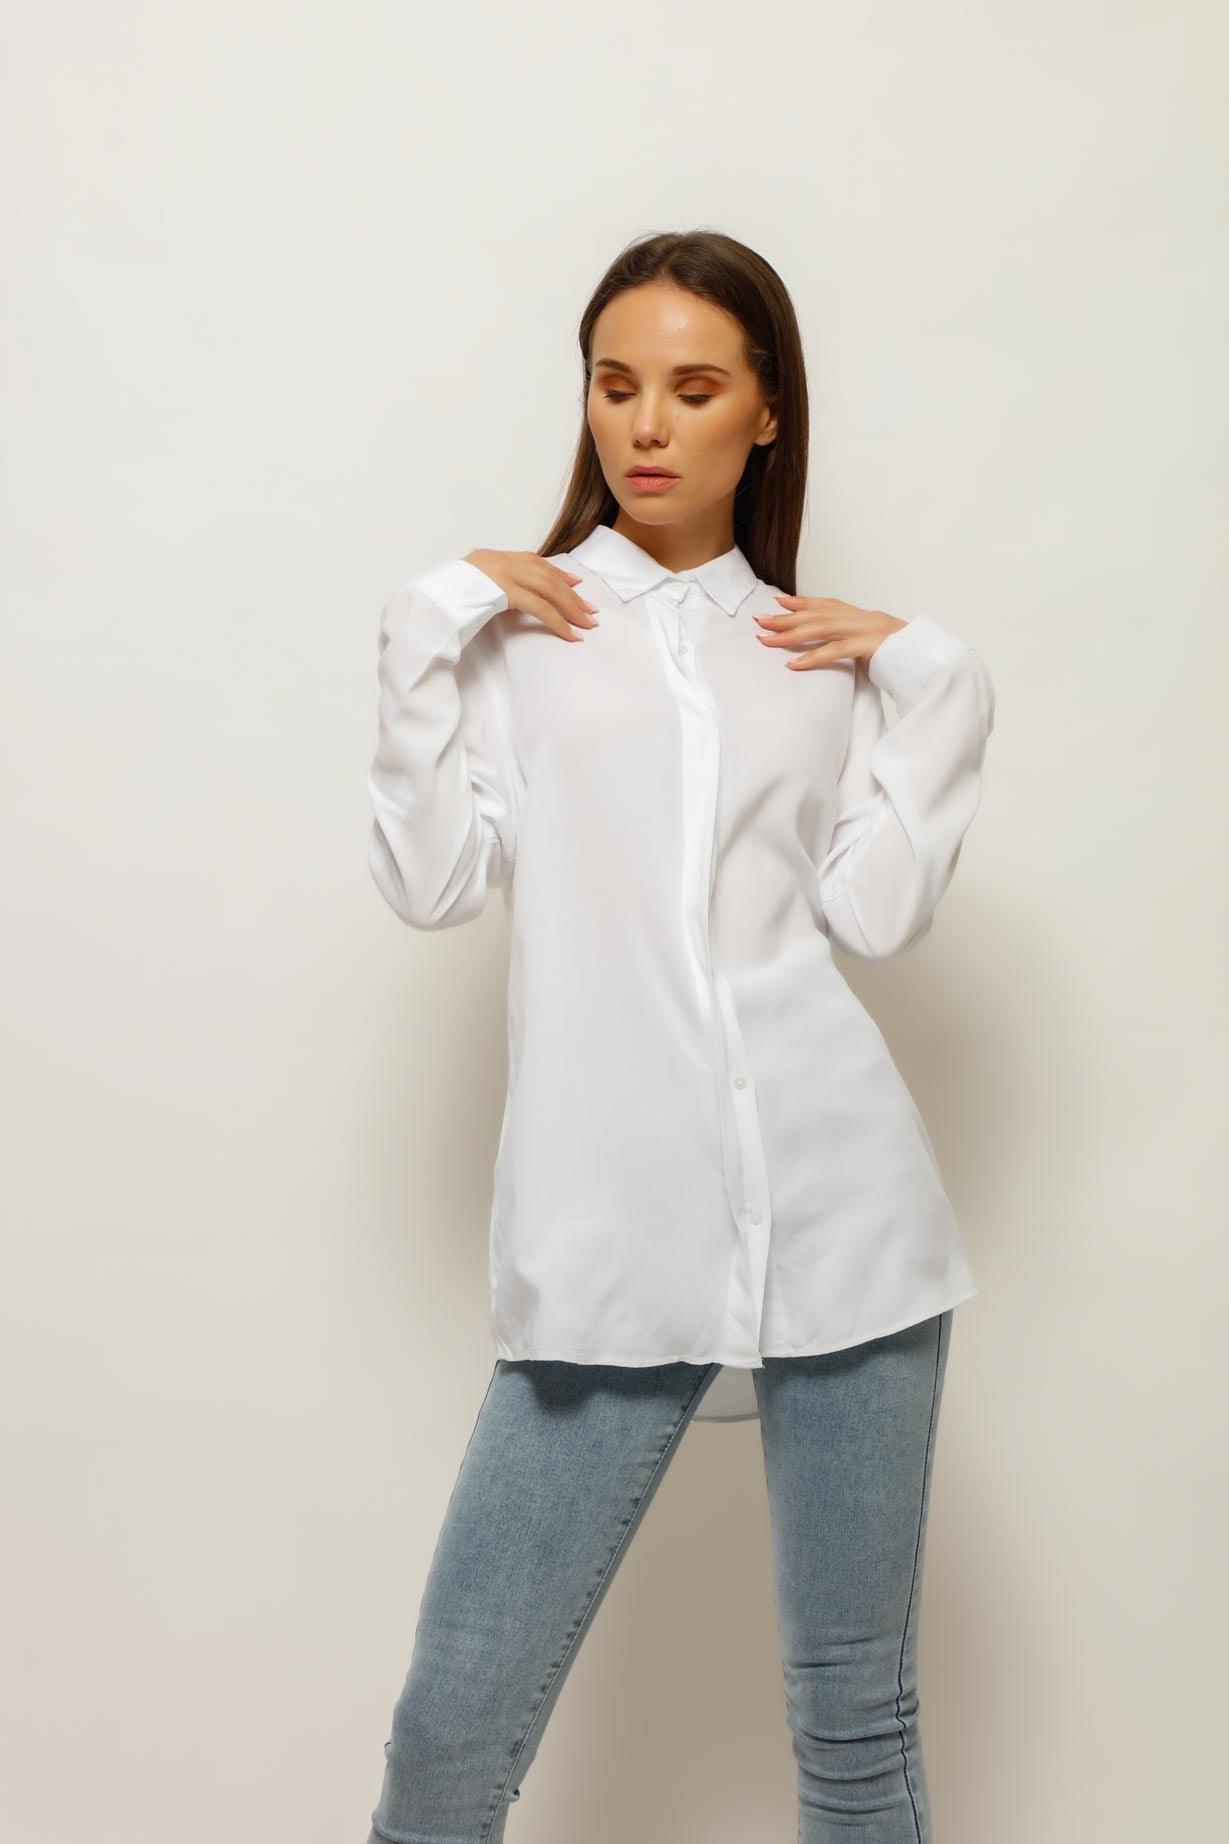 WOMEN'S COLORED CASUAL SHIRT, SHIRT, CORADO, be unique, button, collared, comfy, corado fashion, coradomoda, FASHION, label, lifestyle, longsleeve, made in turkey, new collection, plain, shirt, statement, style, top, white, women, coradomoda, coradomoda.com